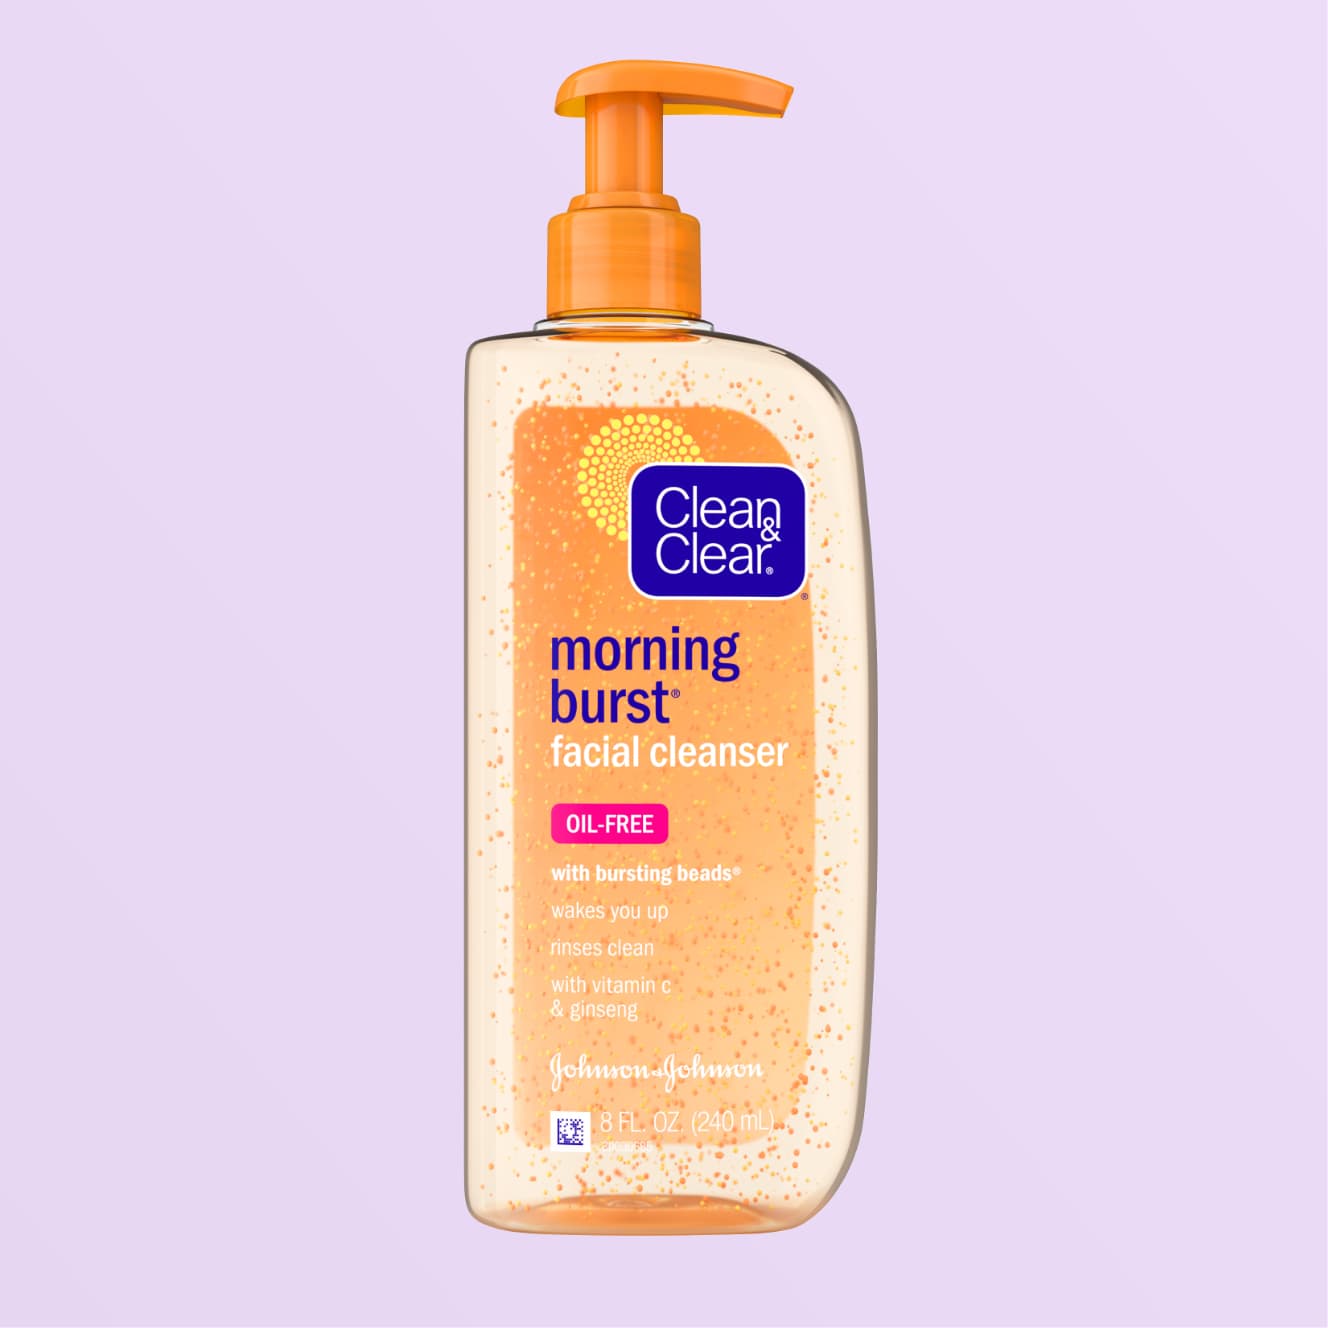 clean and clear morning burst shine control